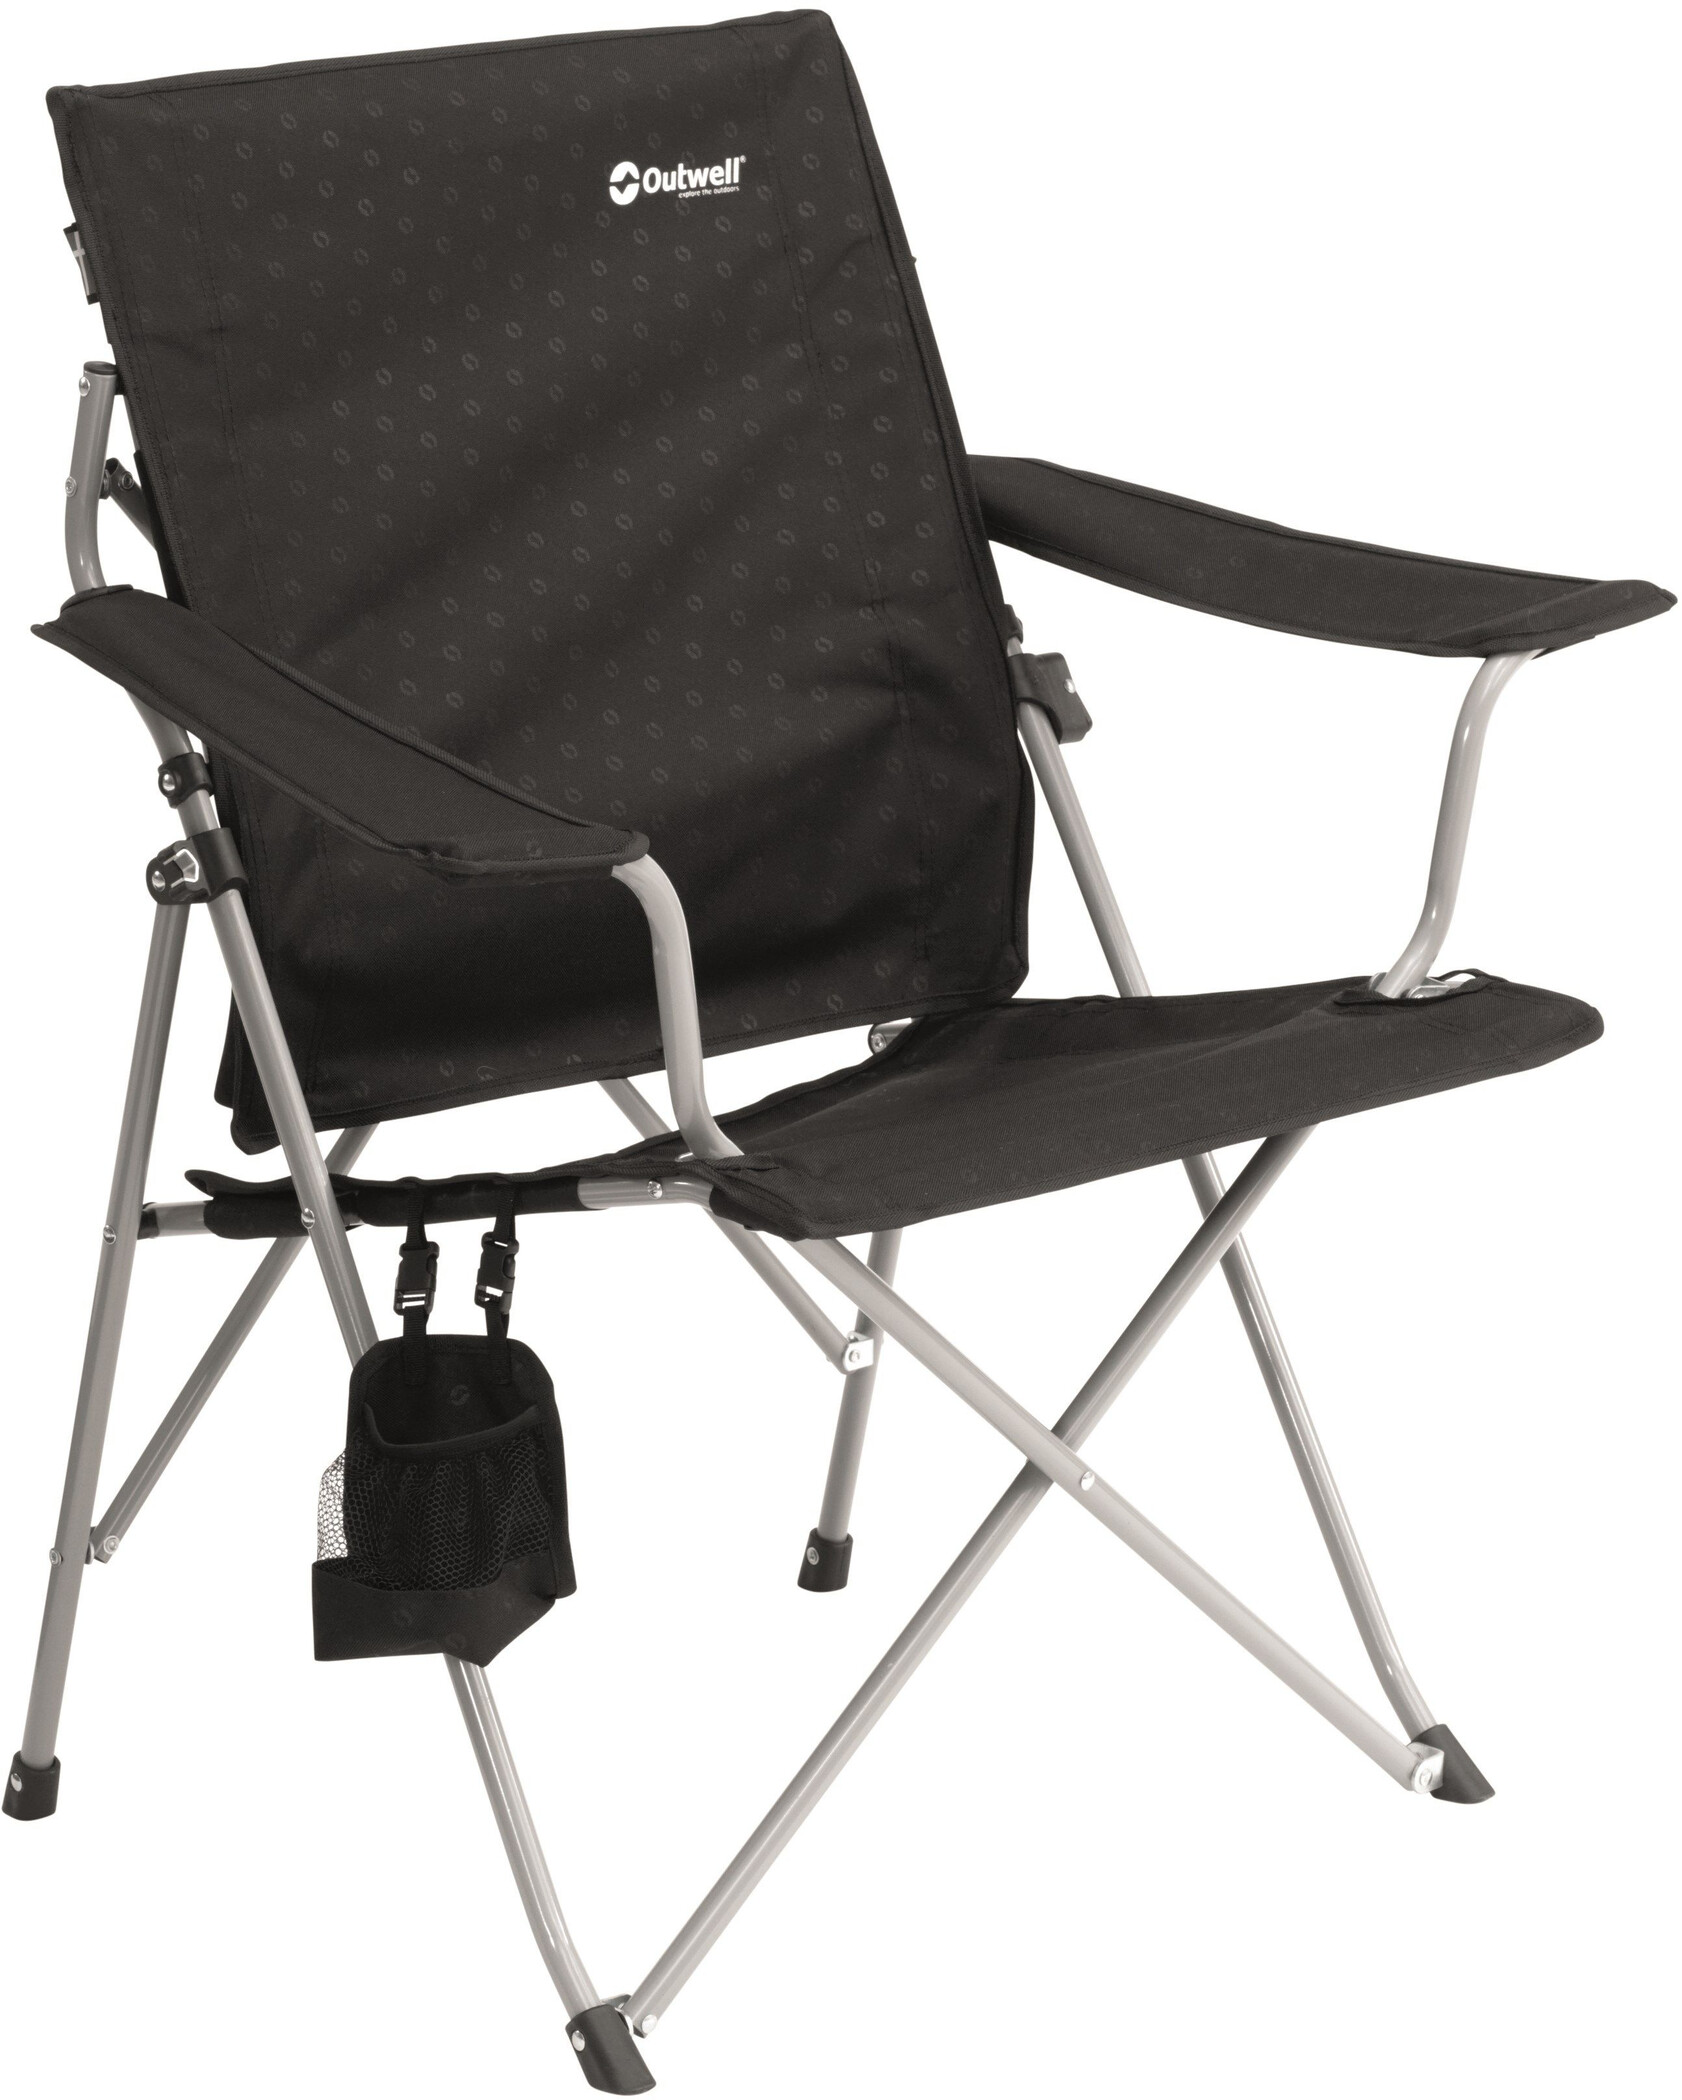 Outwell Acadia Campingsessel 68 x 85 x 114 cm Black